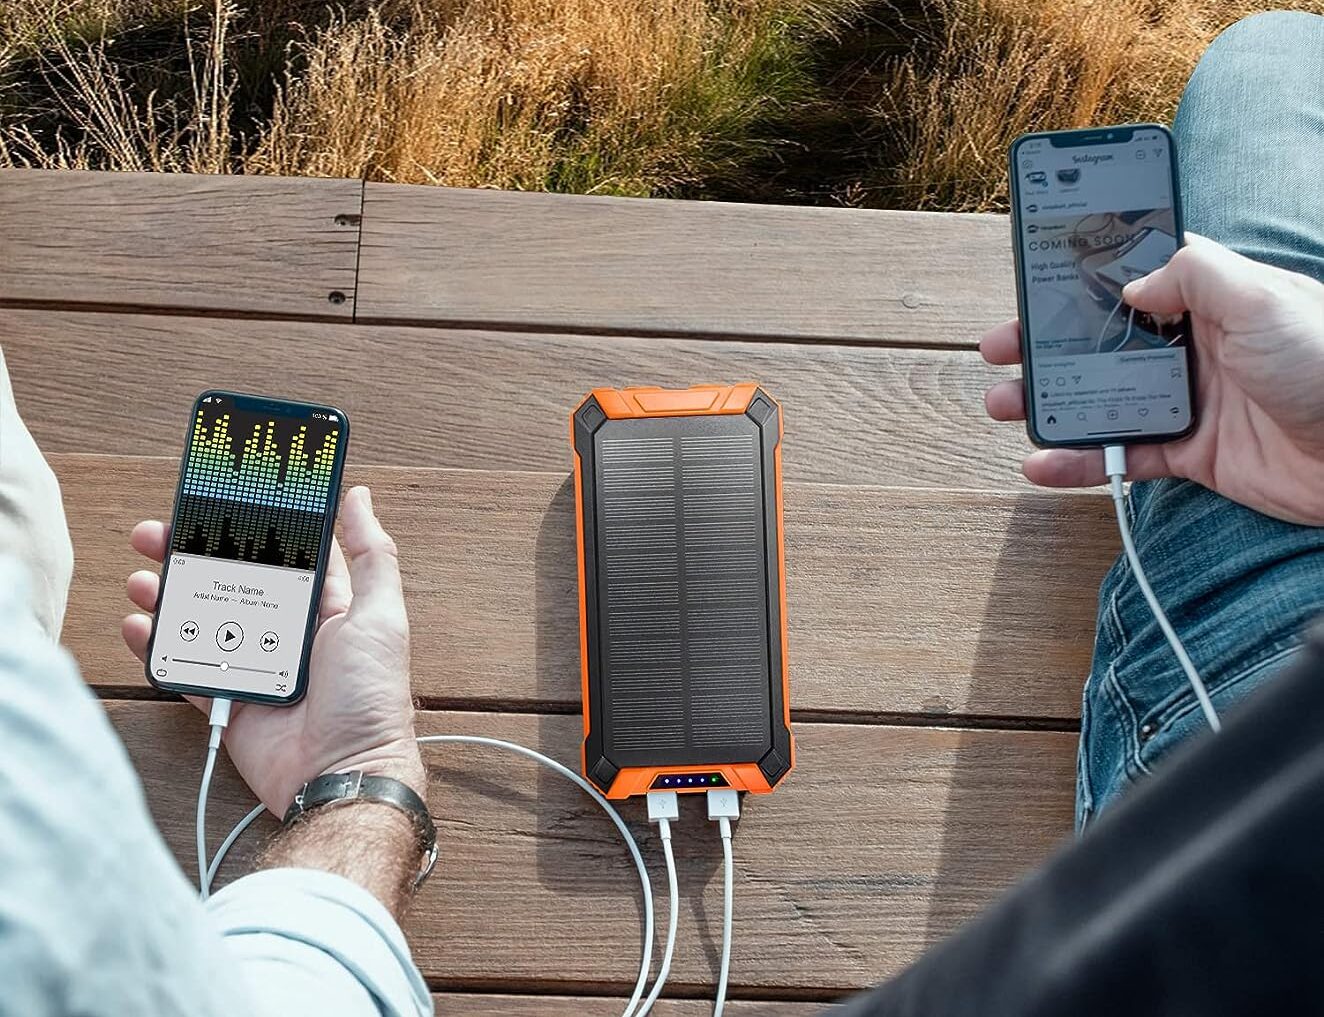 Lokking down onto bench between two seated people, organe solar battery pack charges two working phones held in the persons' hands - photo